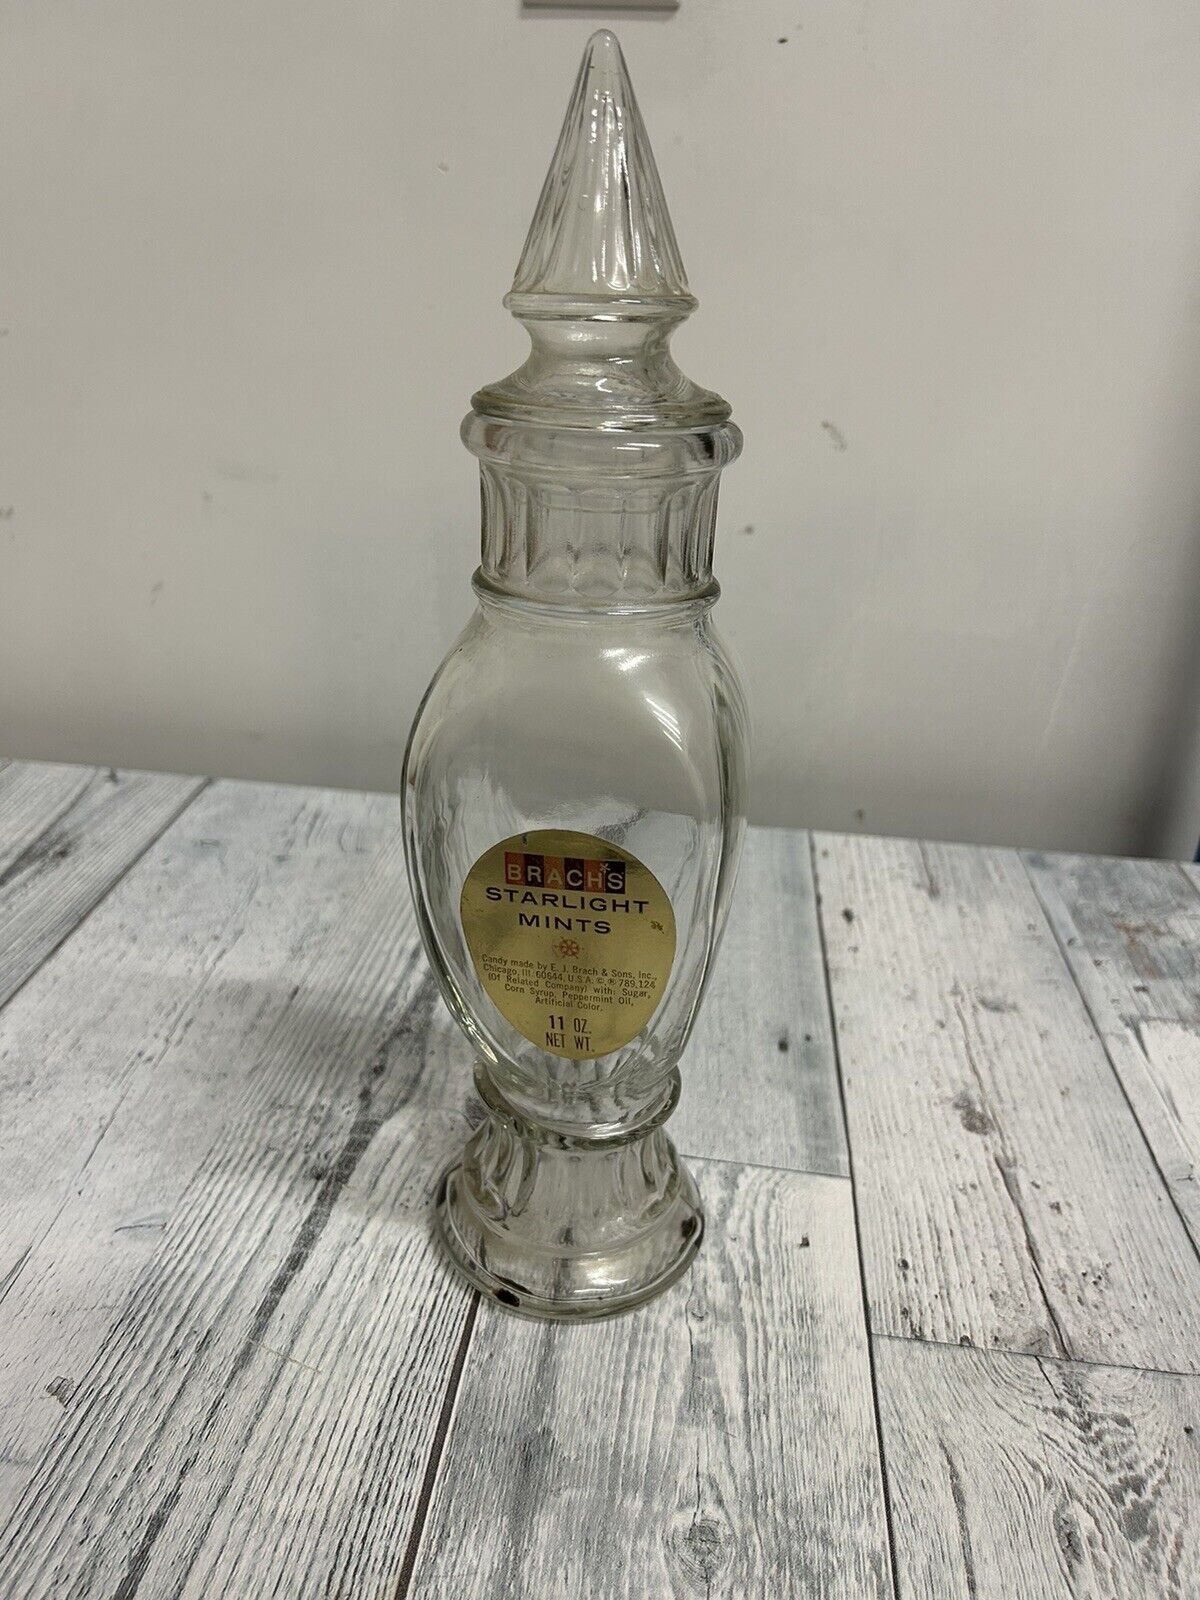 Vintage Brachs Starlight Mints Decanter/Apothecary Jar - With Label 13”